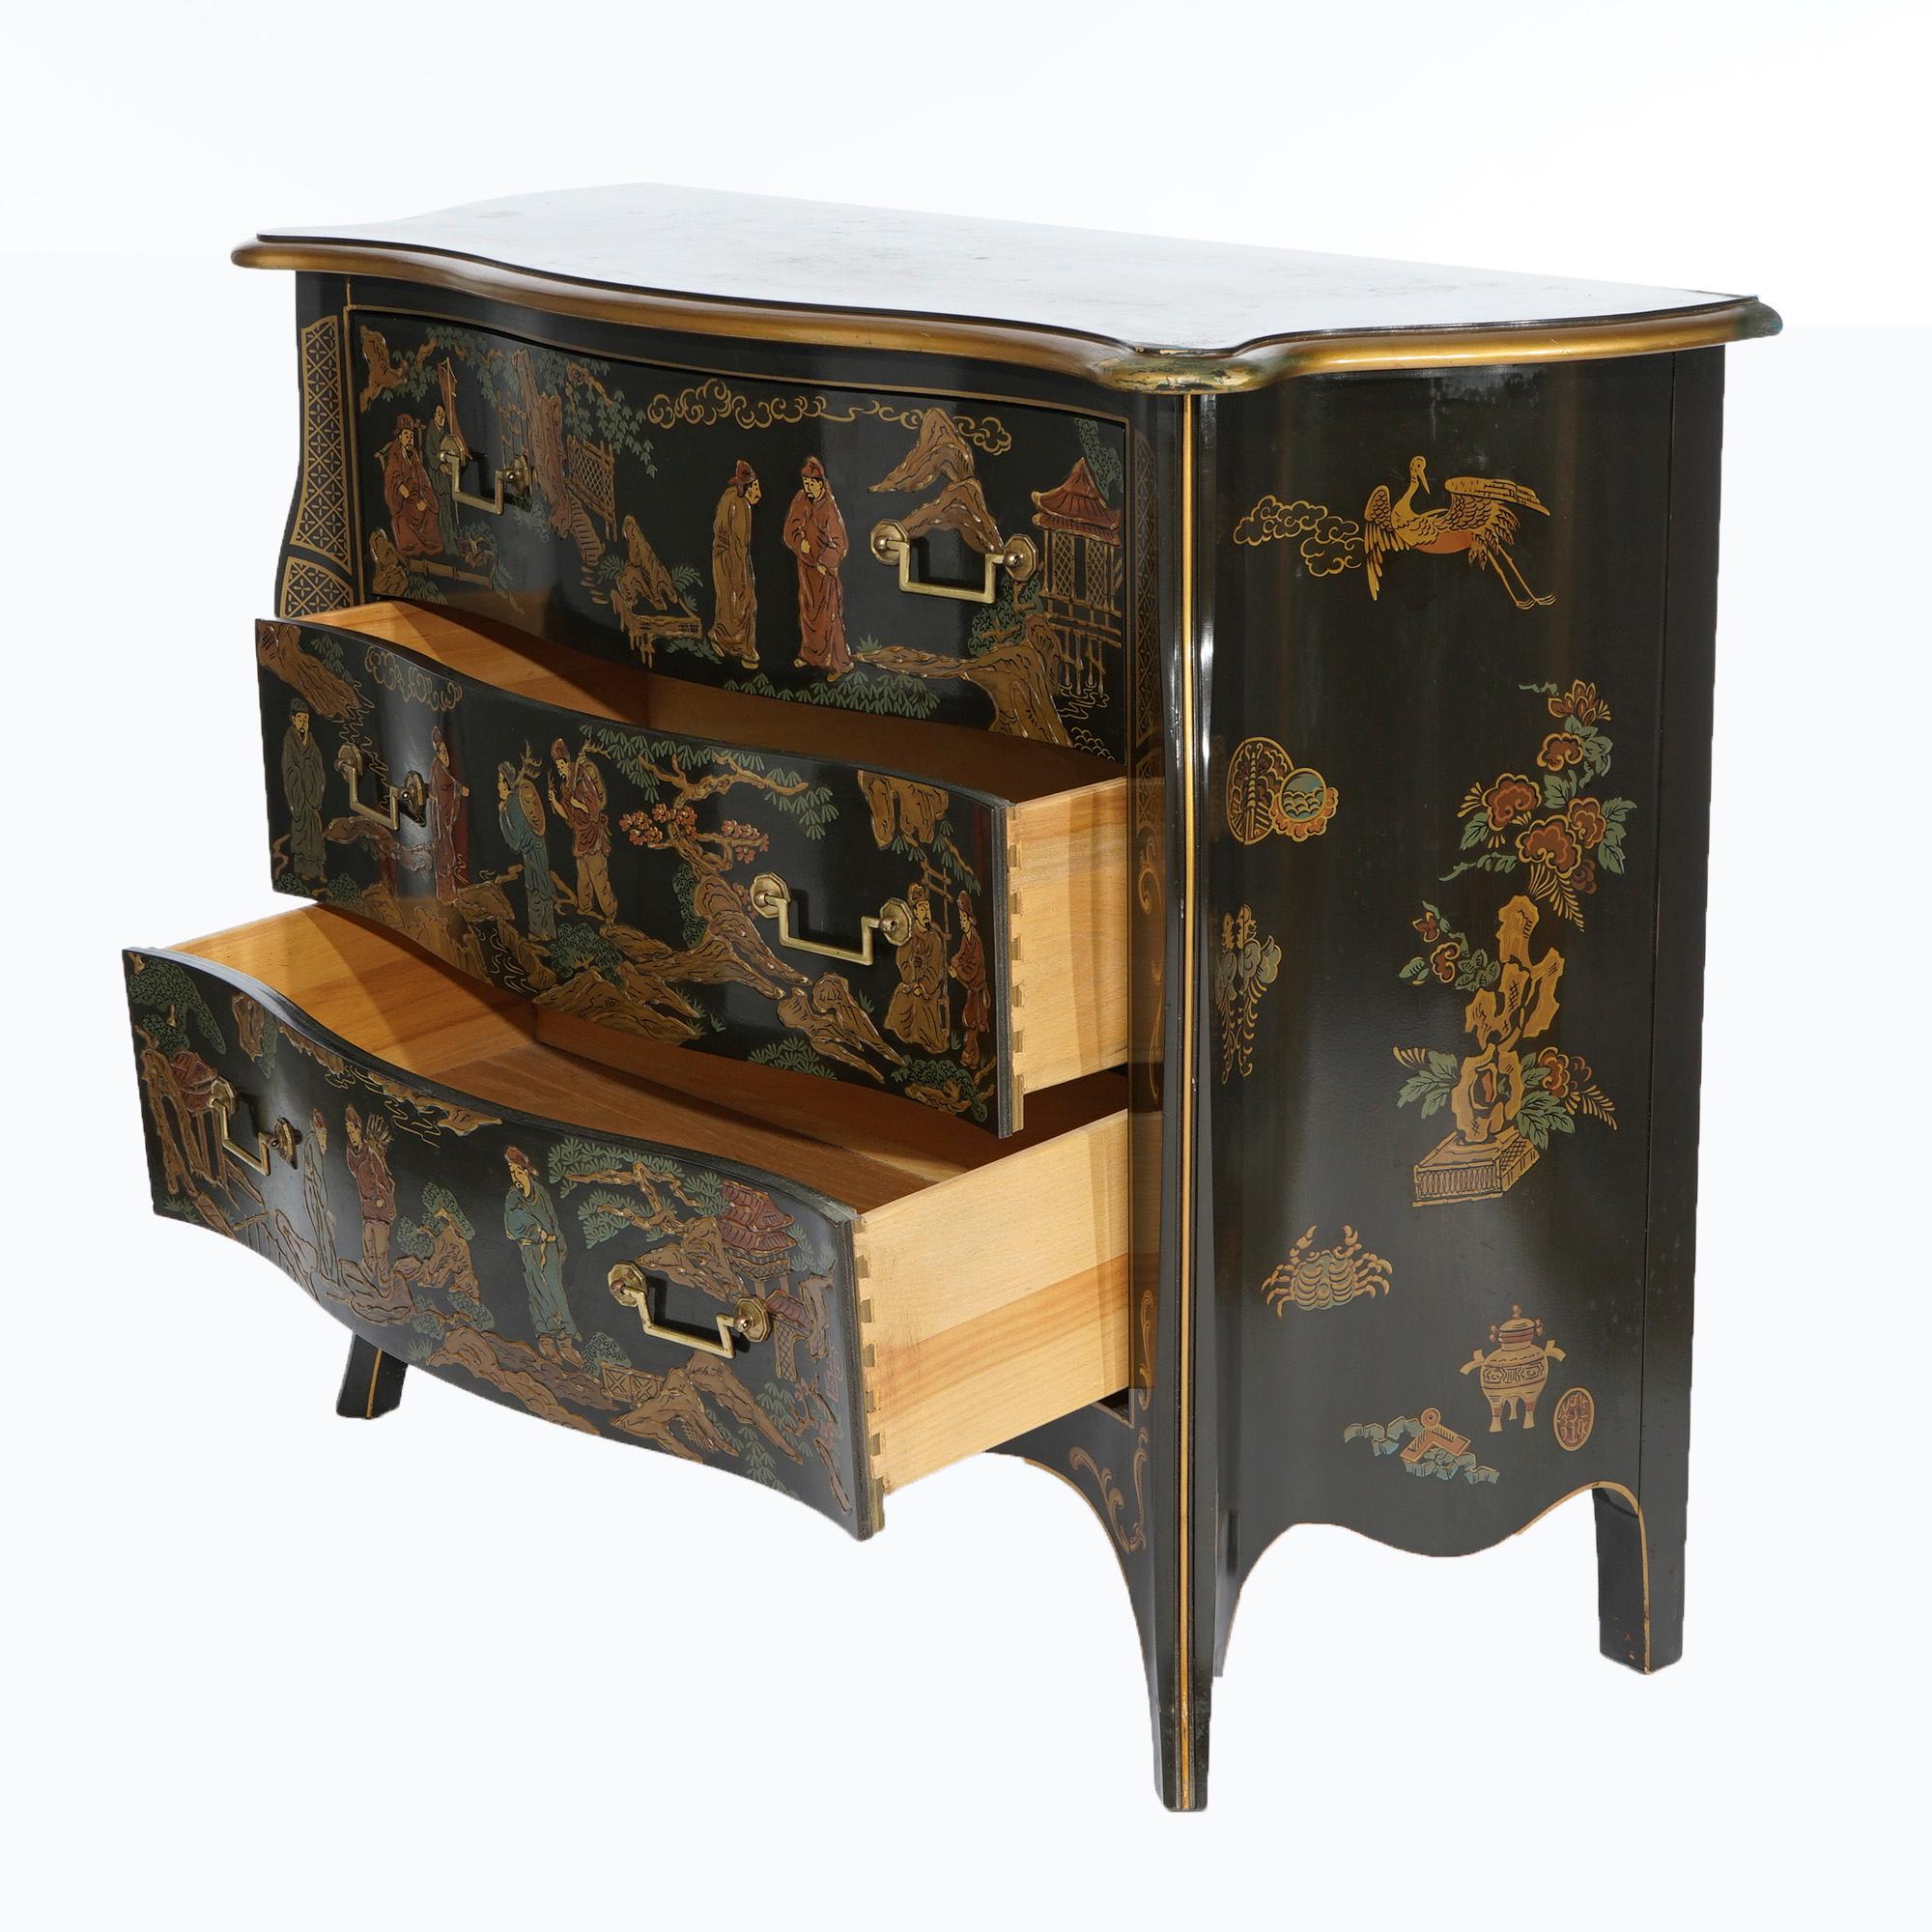 20th Century Drexel Heritage Chinoiserie Decorated & Gilt Commode, Genre Scenes, 20th C